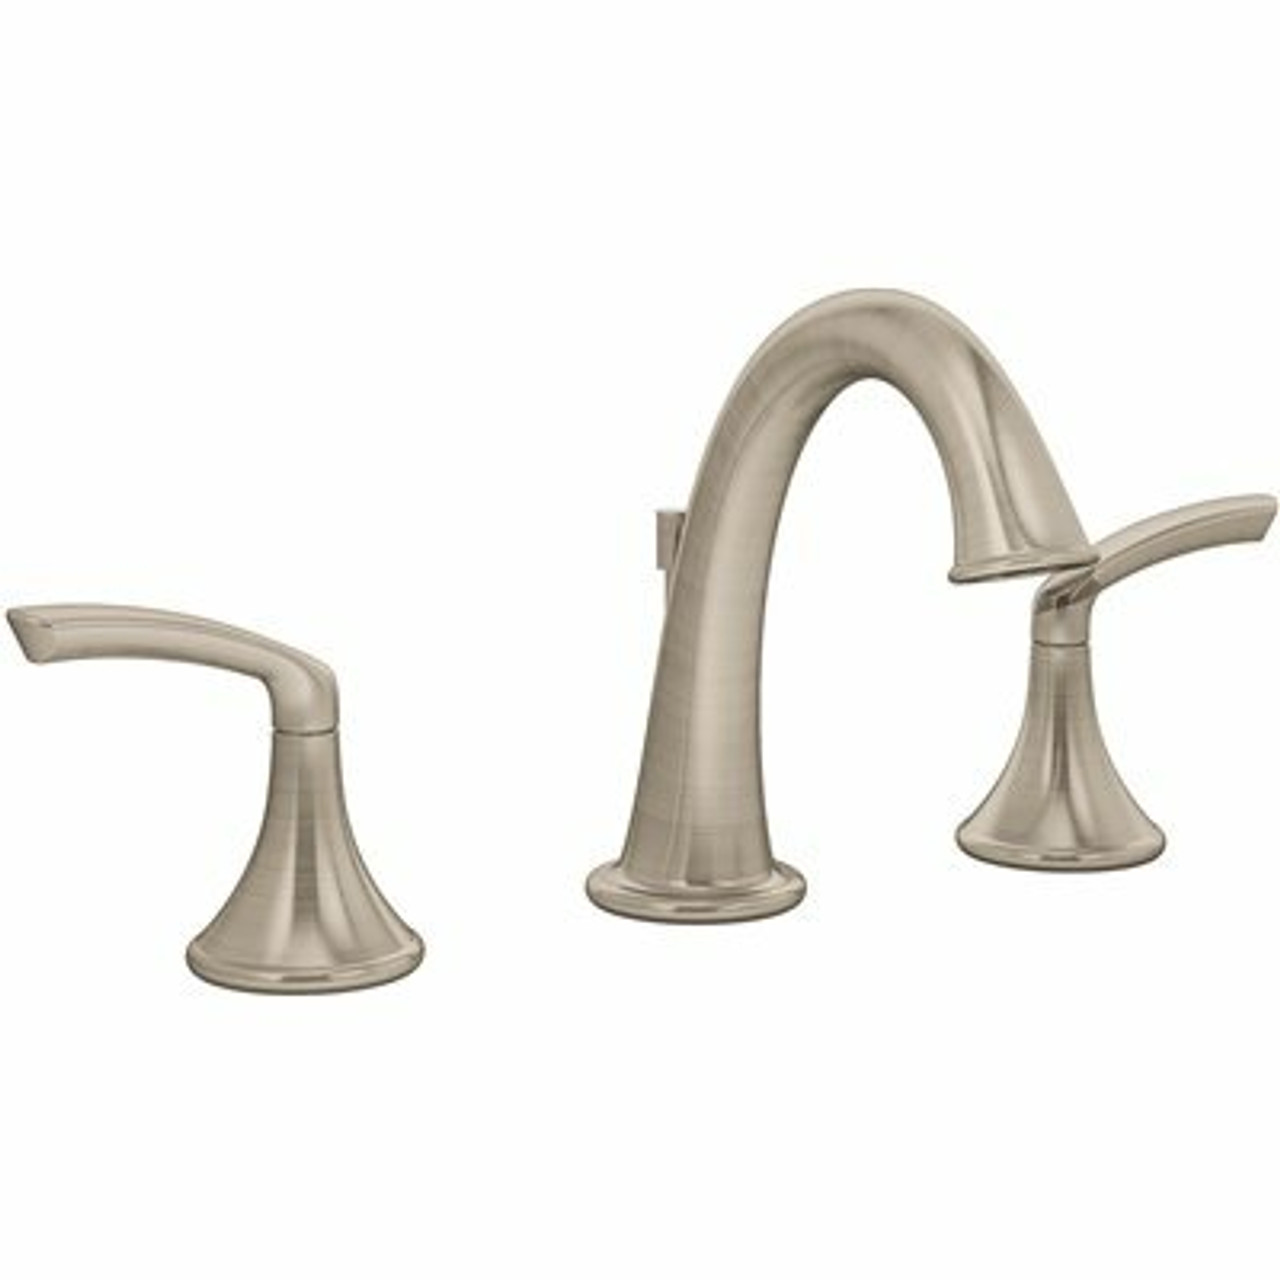 Symmons Minimalist 8 In. Widespread 2-Handle Bathroom Faucet With Drain Assembly In Brushed Nickel - 300274815